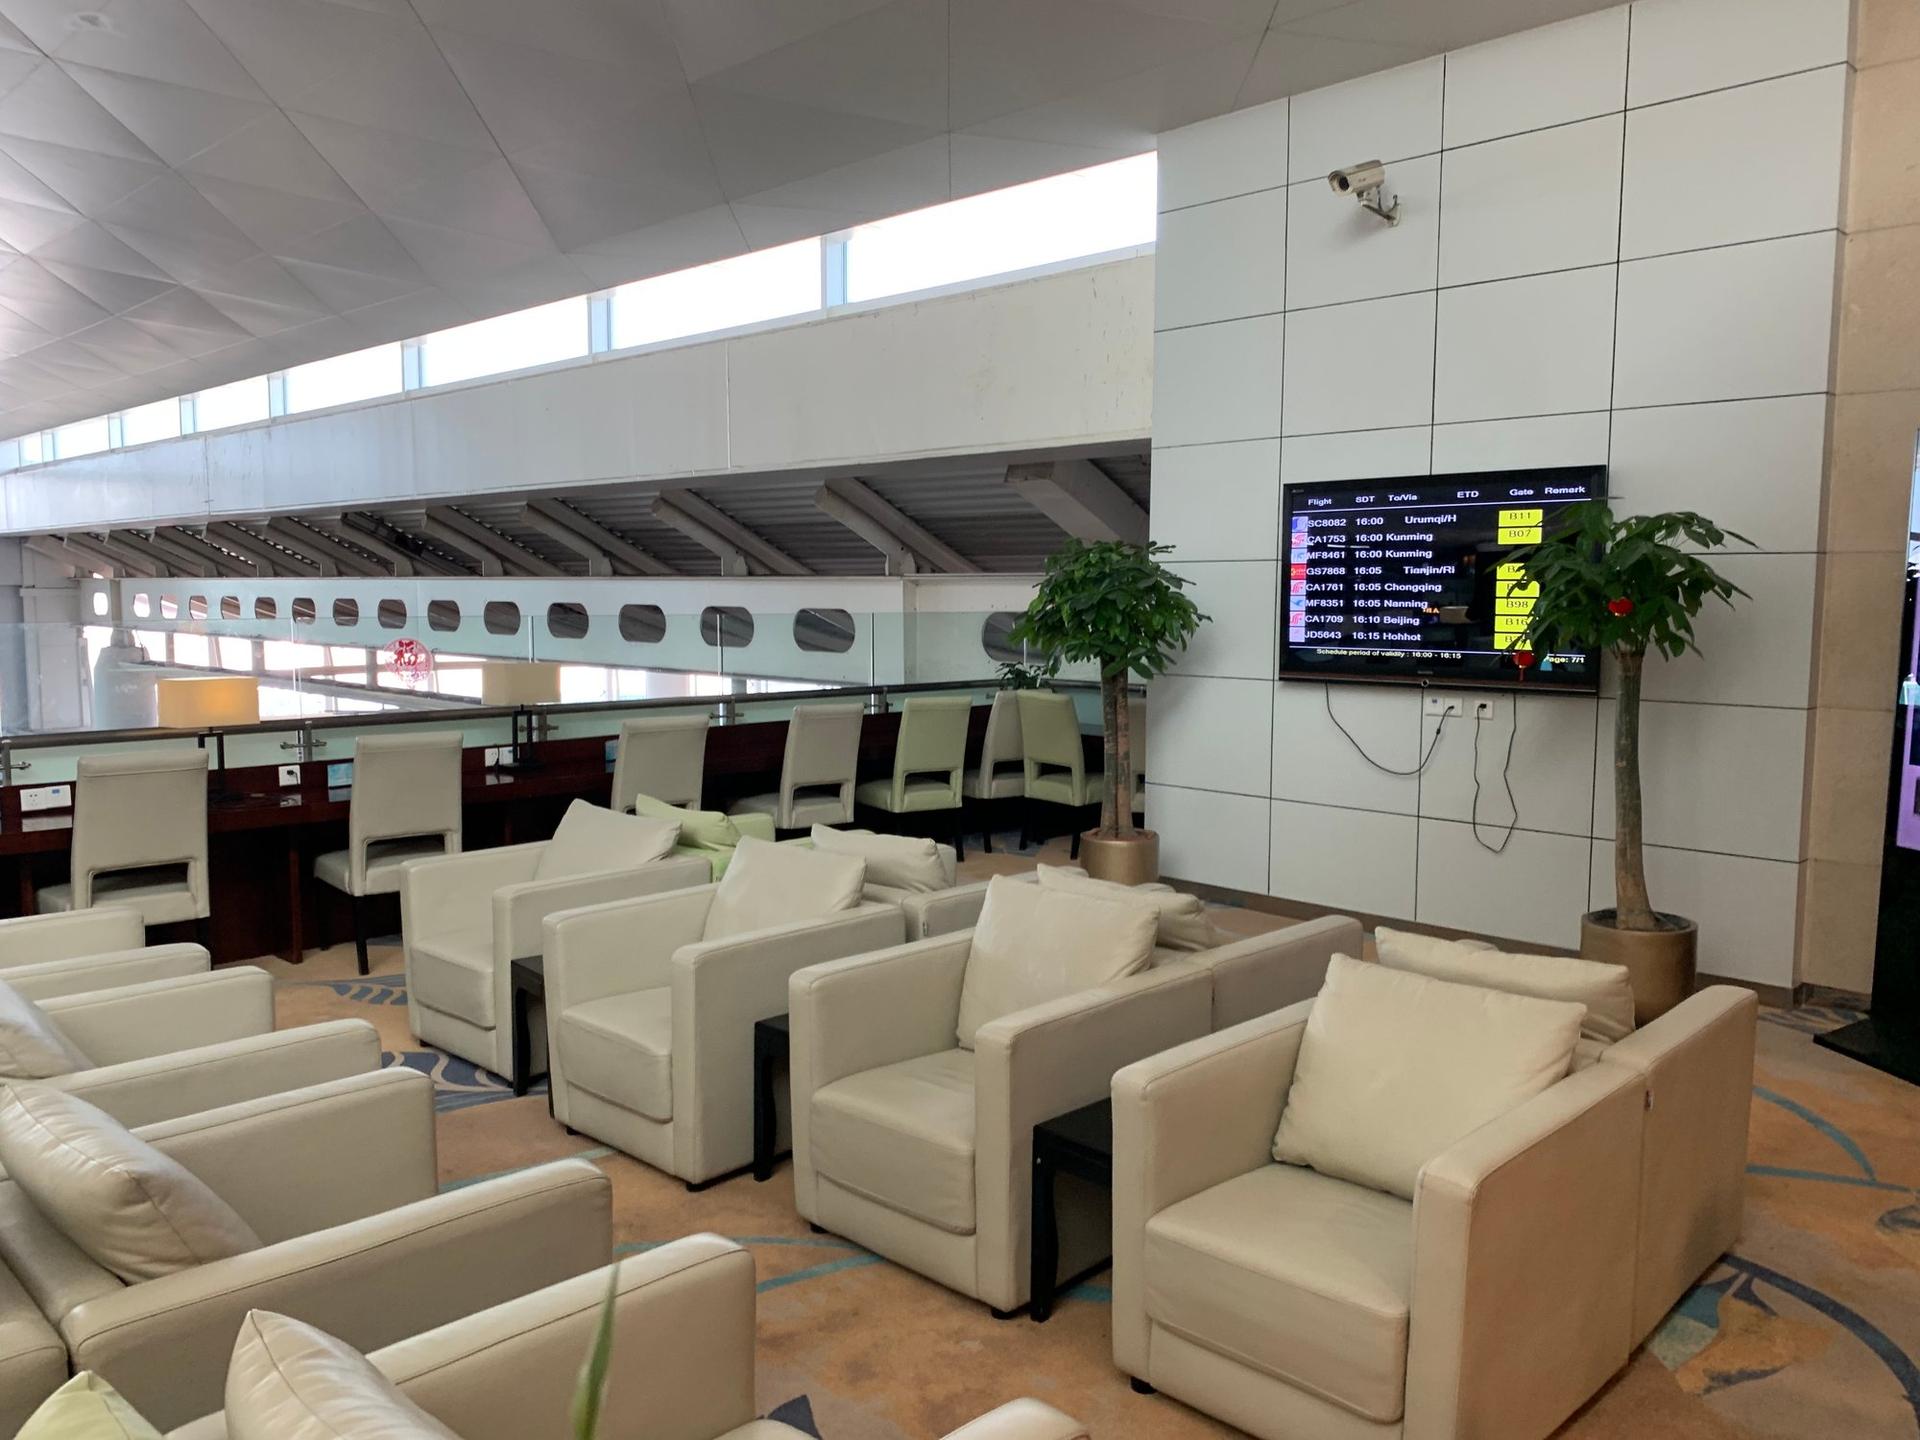 China Eastern First & Business Class Lounge image 1 of 3